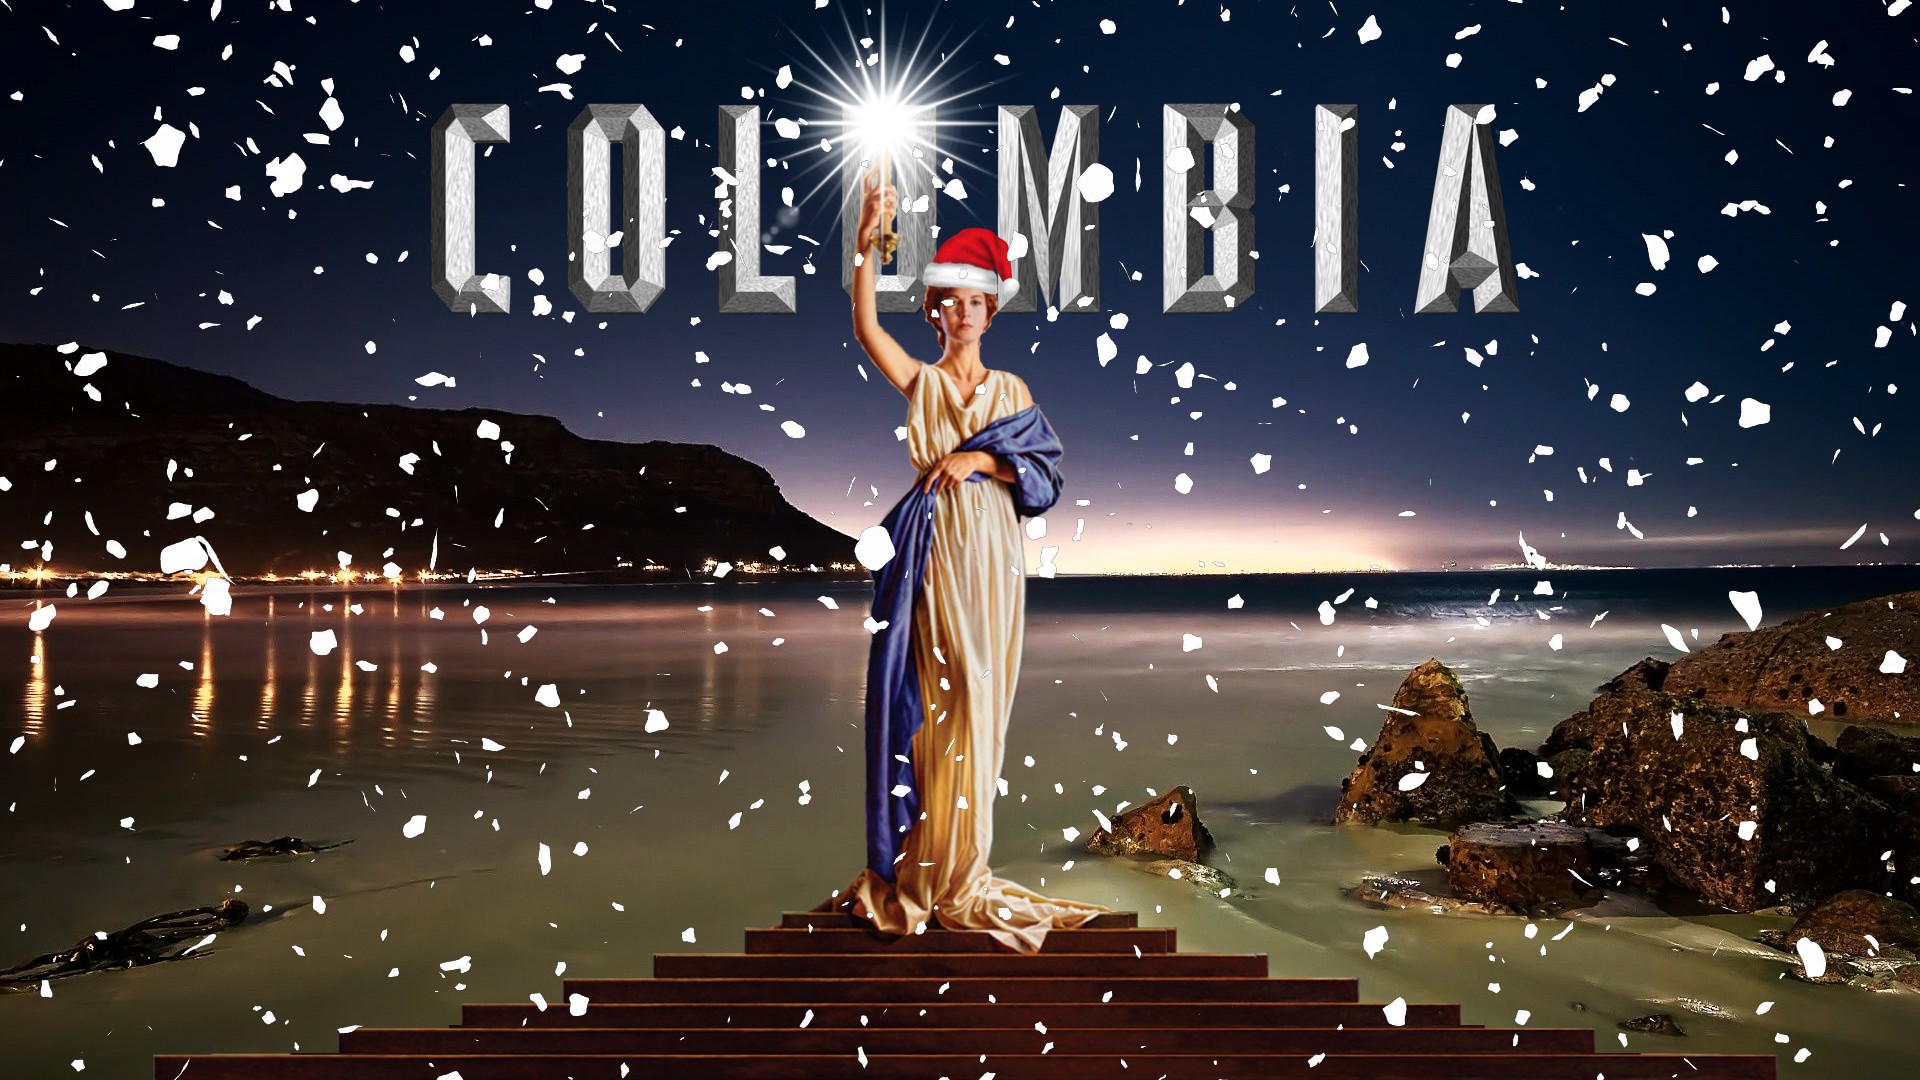 Columbia Pictures, Dream Logos Wiki